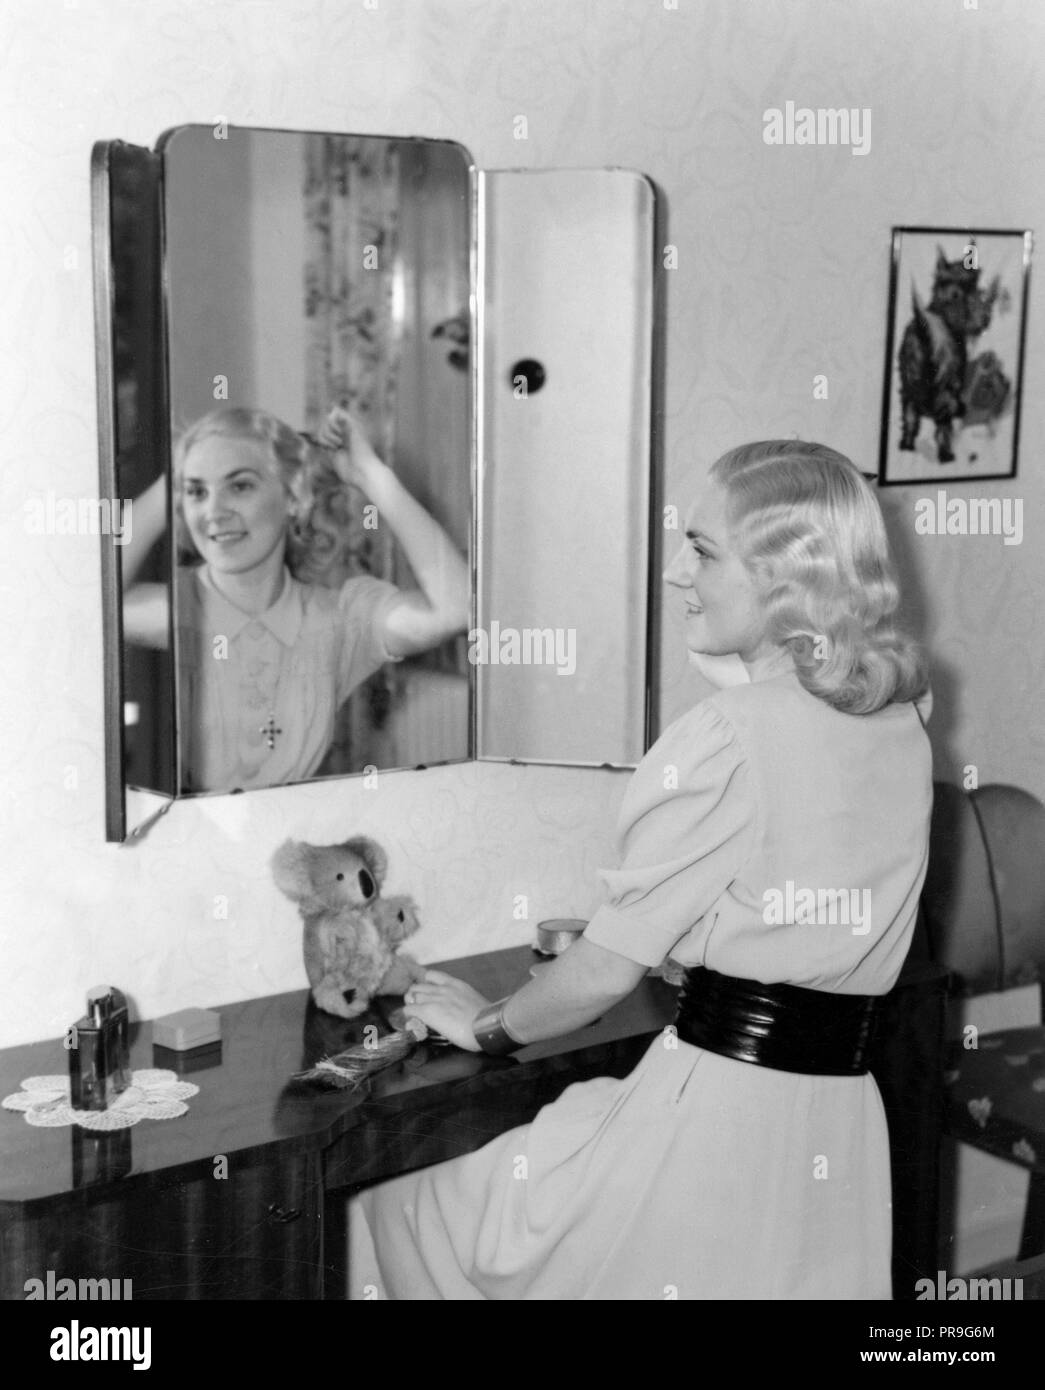 Cosmetics in the 1940s. Young opera singer Inge-Gerd Norlin at home in front of a mirror. The blonde young woman wears a light brightcolored dress with a wide black belt around the waist. She has a nice 1940s hairdo and combs her blonde hair in front of the mirror. Sweden 1940s Stock Photo